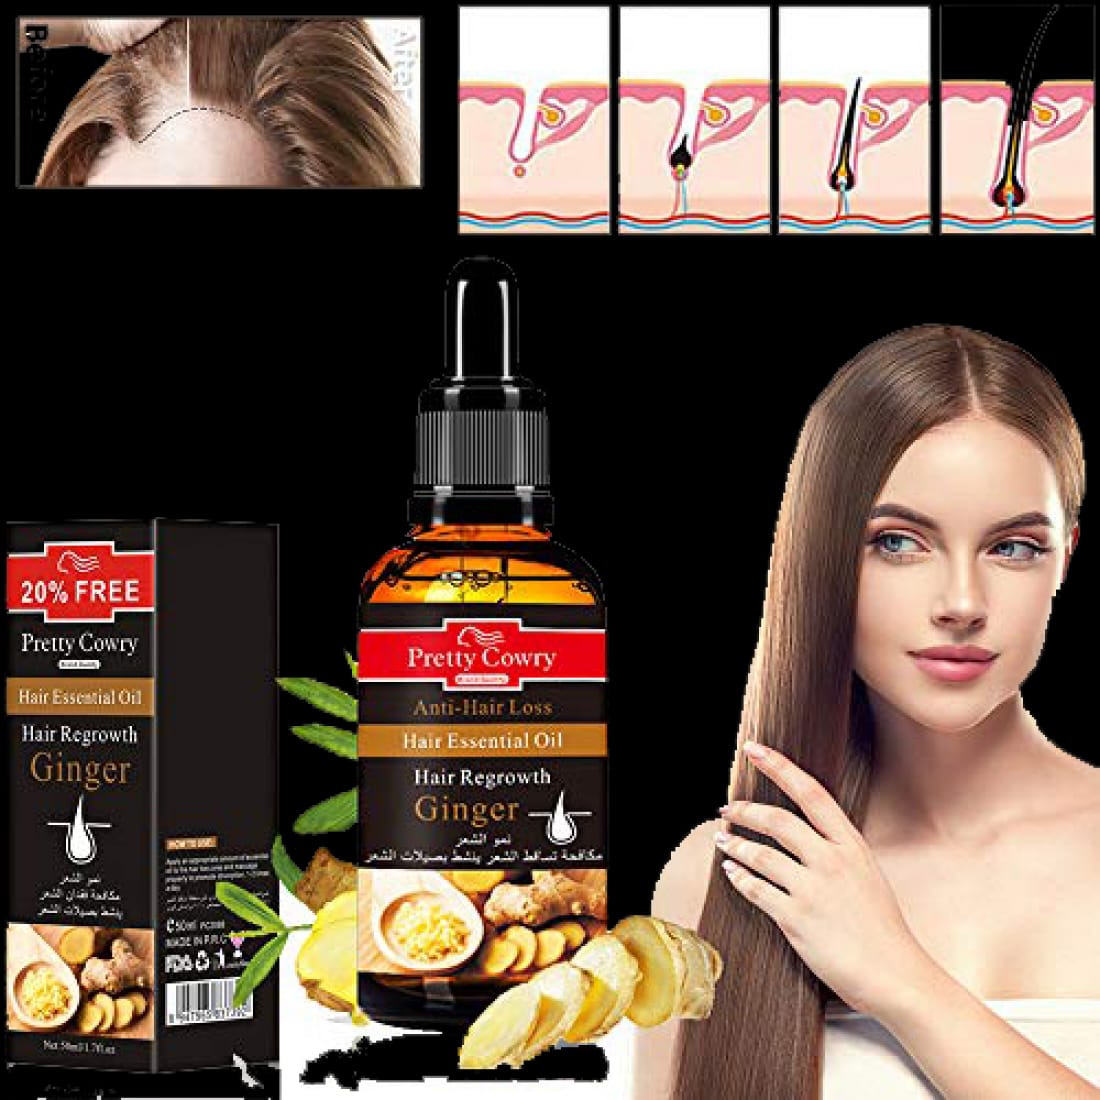 Pretty Cowry No Side Effects Natural Anti-hair Serum Hair Loss Products Nourishing Ginger Hair Growth Oil.